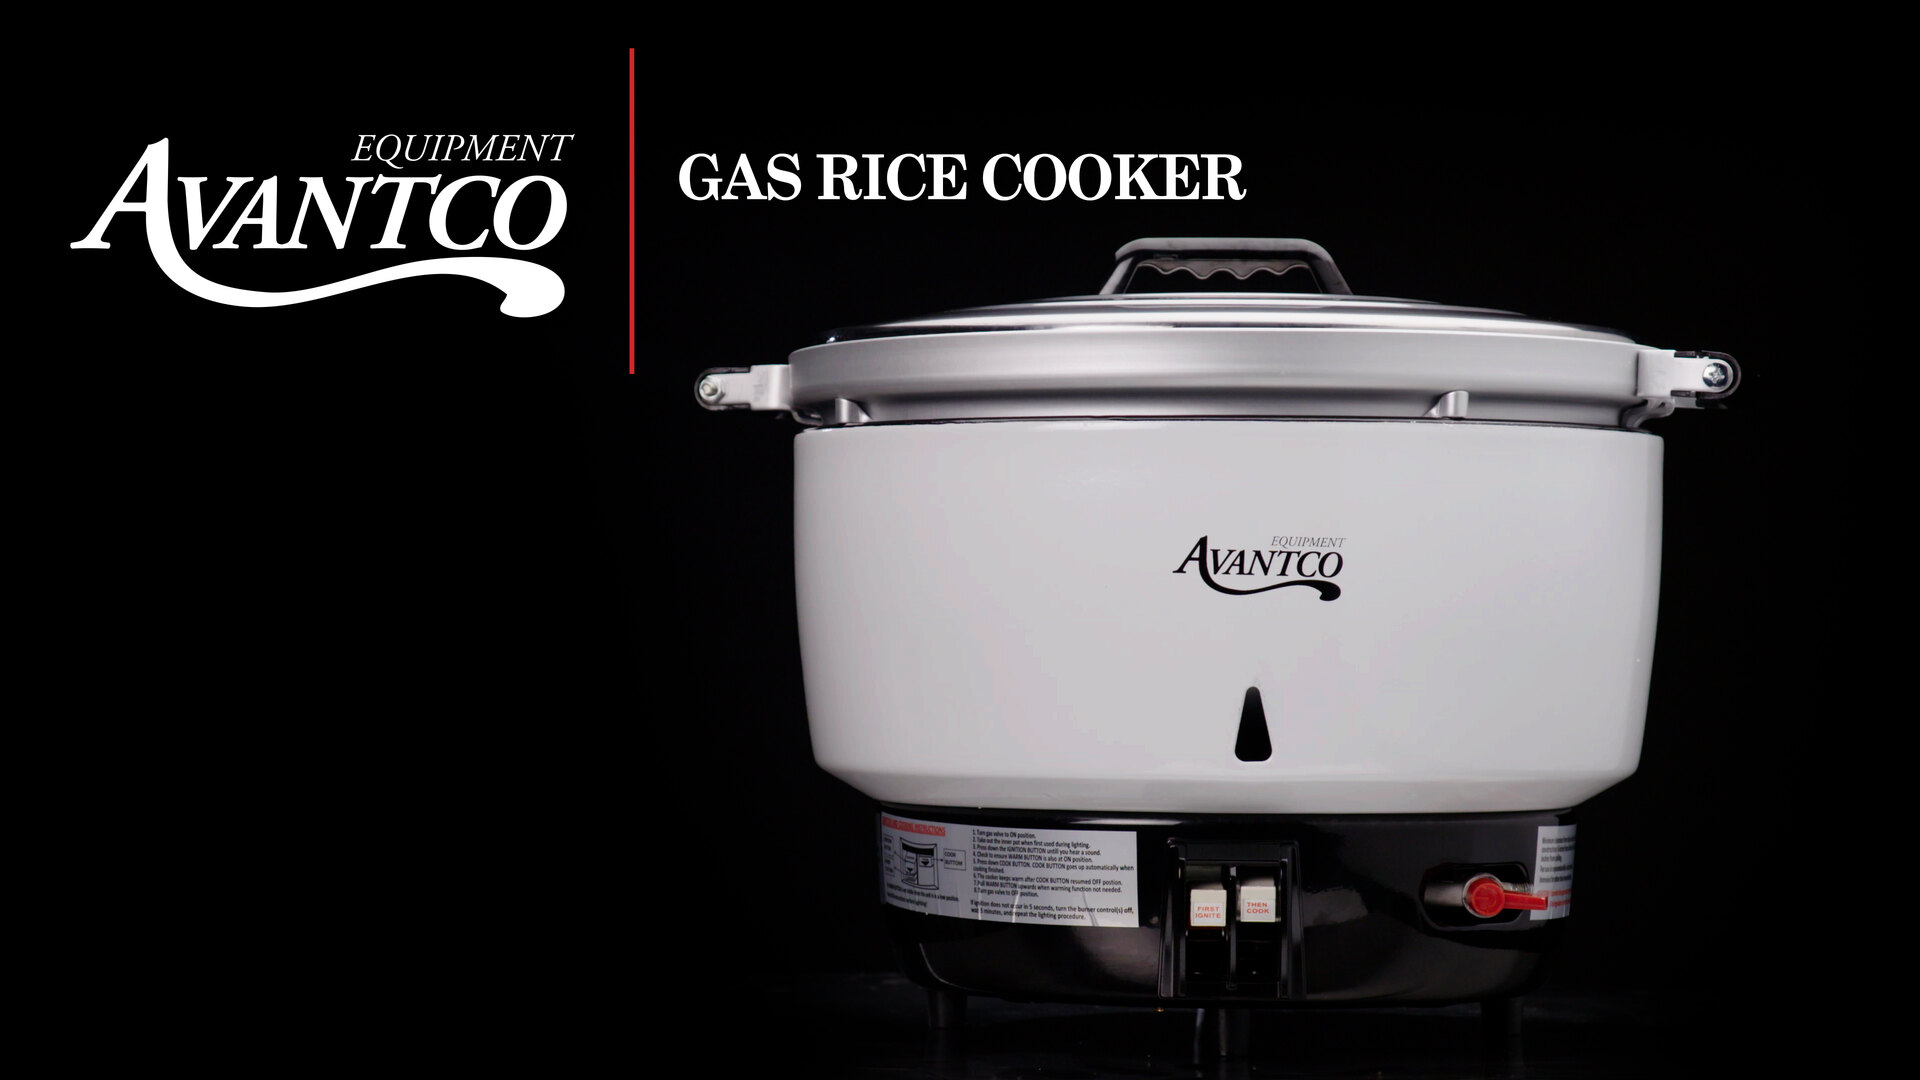 Galaxy 60 Cup (30 Cup Raw) Electric Rice Cooker / Warmer - 120V, 1550W